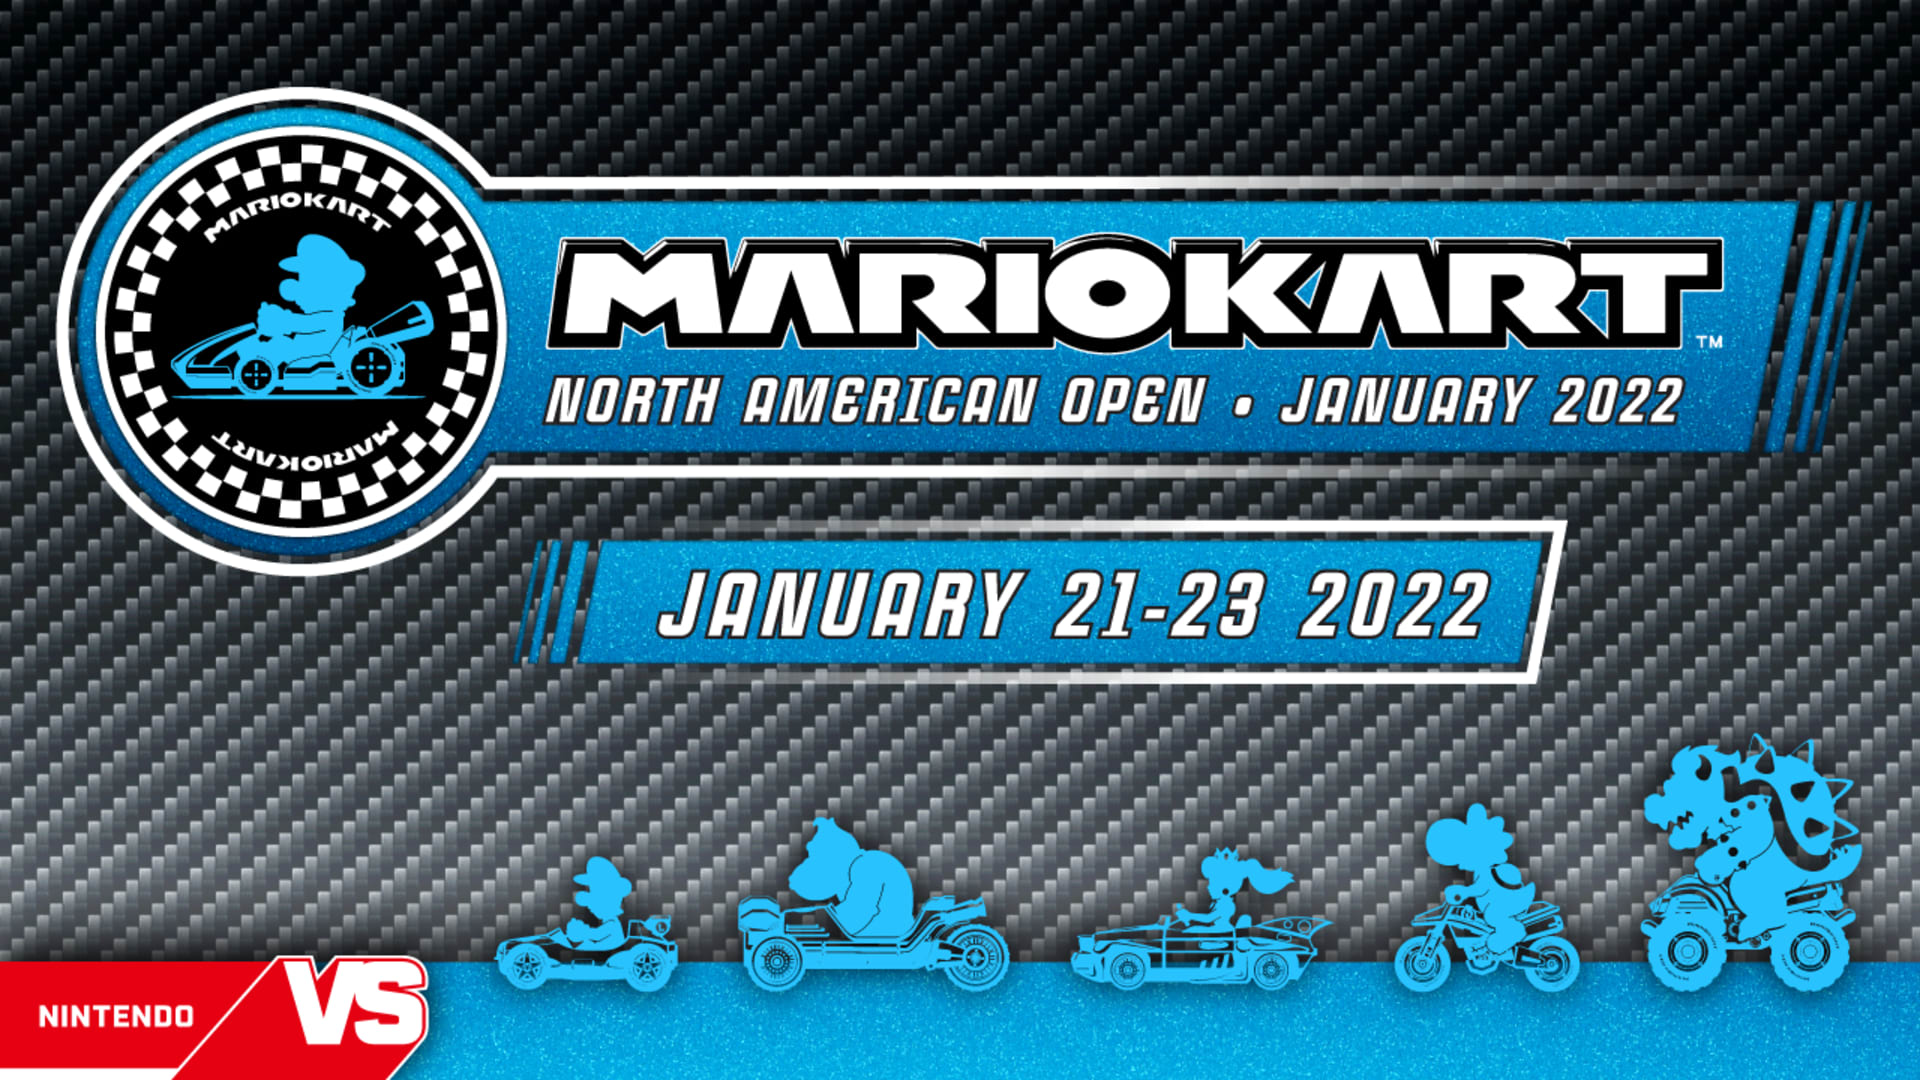 Mario Kart North American Open January 2022 Nintendo Official Site